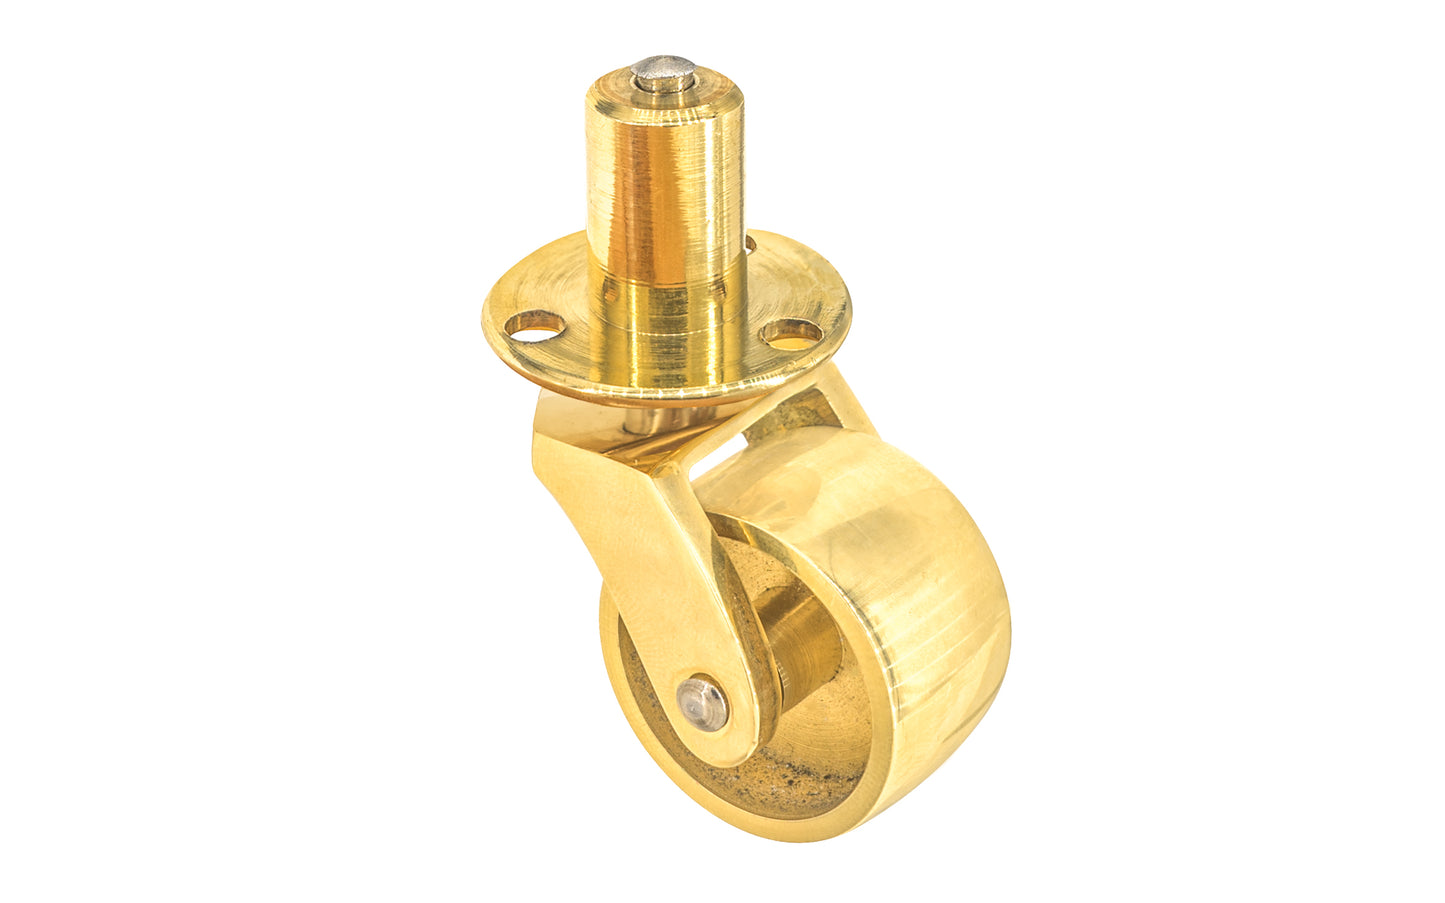 Solid Brass Pivot & Plate Caster ~ 1" Wheel ~ Non-Lacquered Brass (will patina over time)